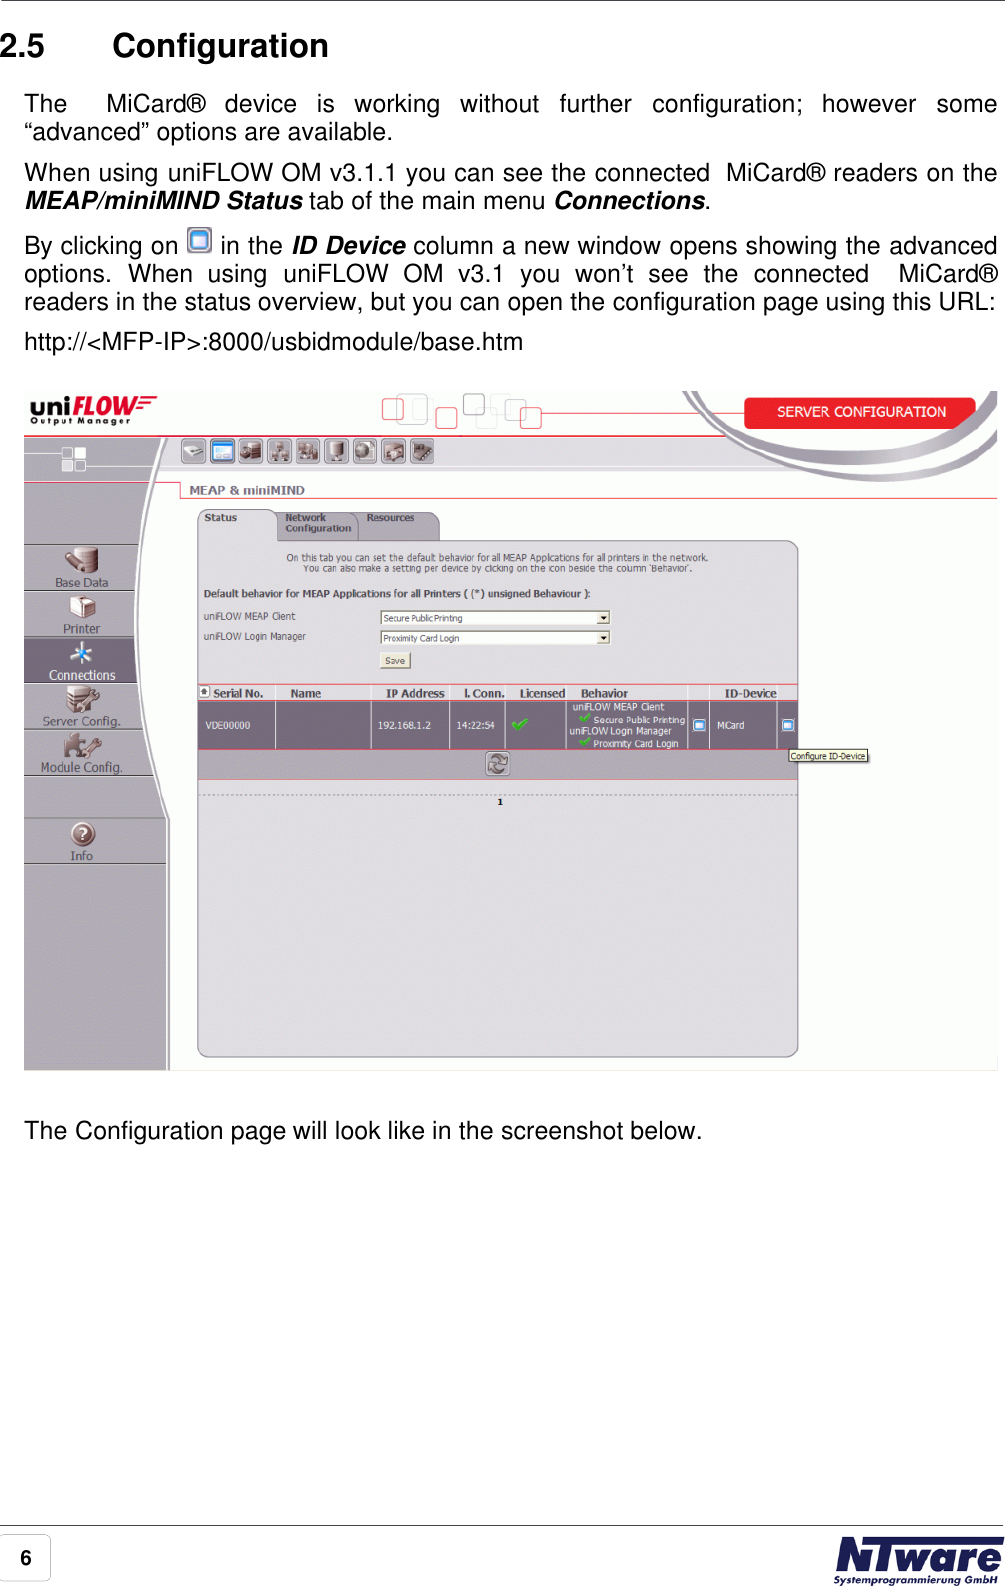 62.5 ConfigurationThe    MiCard®  device  is  working  without  further  configuration;  however  some“advanced” options are available. When using uniFLOW OM v3.1.1 you can see the connected  MiCard® readers on theMEAP/miniMIND Status tab of the main menu Connections.By clicking on  in the ID Device column a new window opens showing the advancedoptions.  When  using  uniFLOW  OM  v3.1  you  won’t  see  the  connected    MiCard®readers in the status overview, but you can open the configuration page using this URL:http://&lt;MFP-IP&gt;:8000/usbidmodule/base.htmThe Configuration page will look like in the screenshot below.